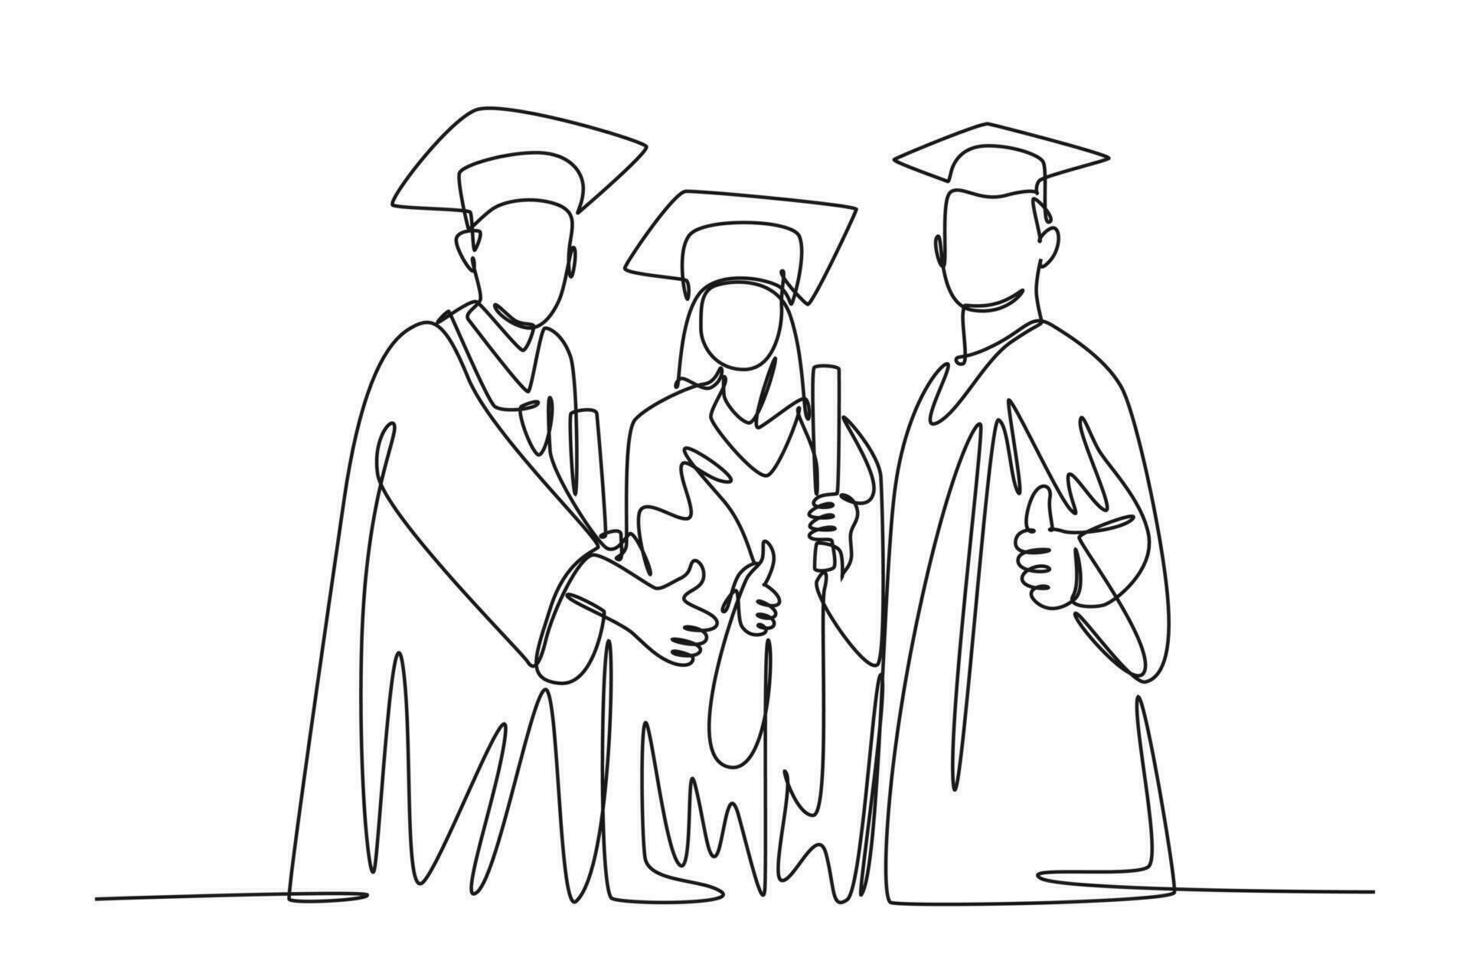 Continuous one line drawing group of young happy graduate male and female college student wearing gown, giving thumbs up gesture. Education concept. Single line draw design vector graphic illustration